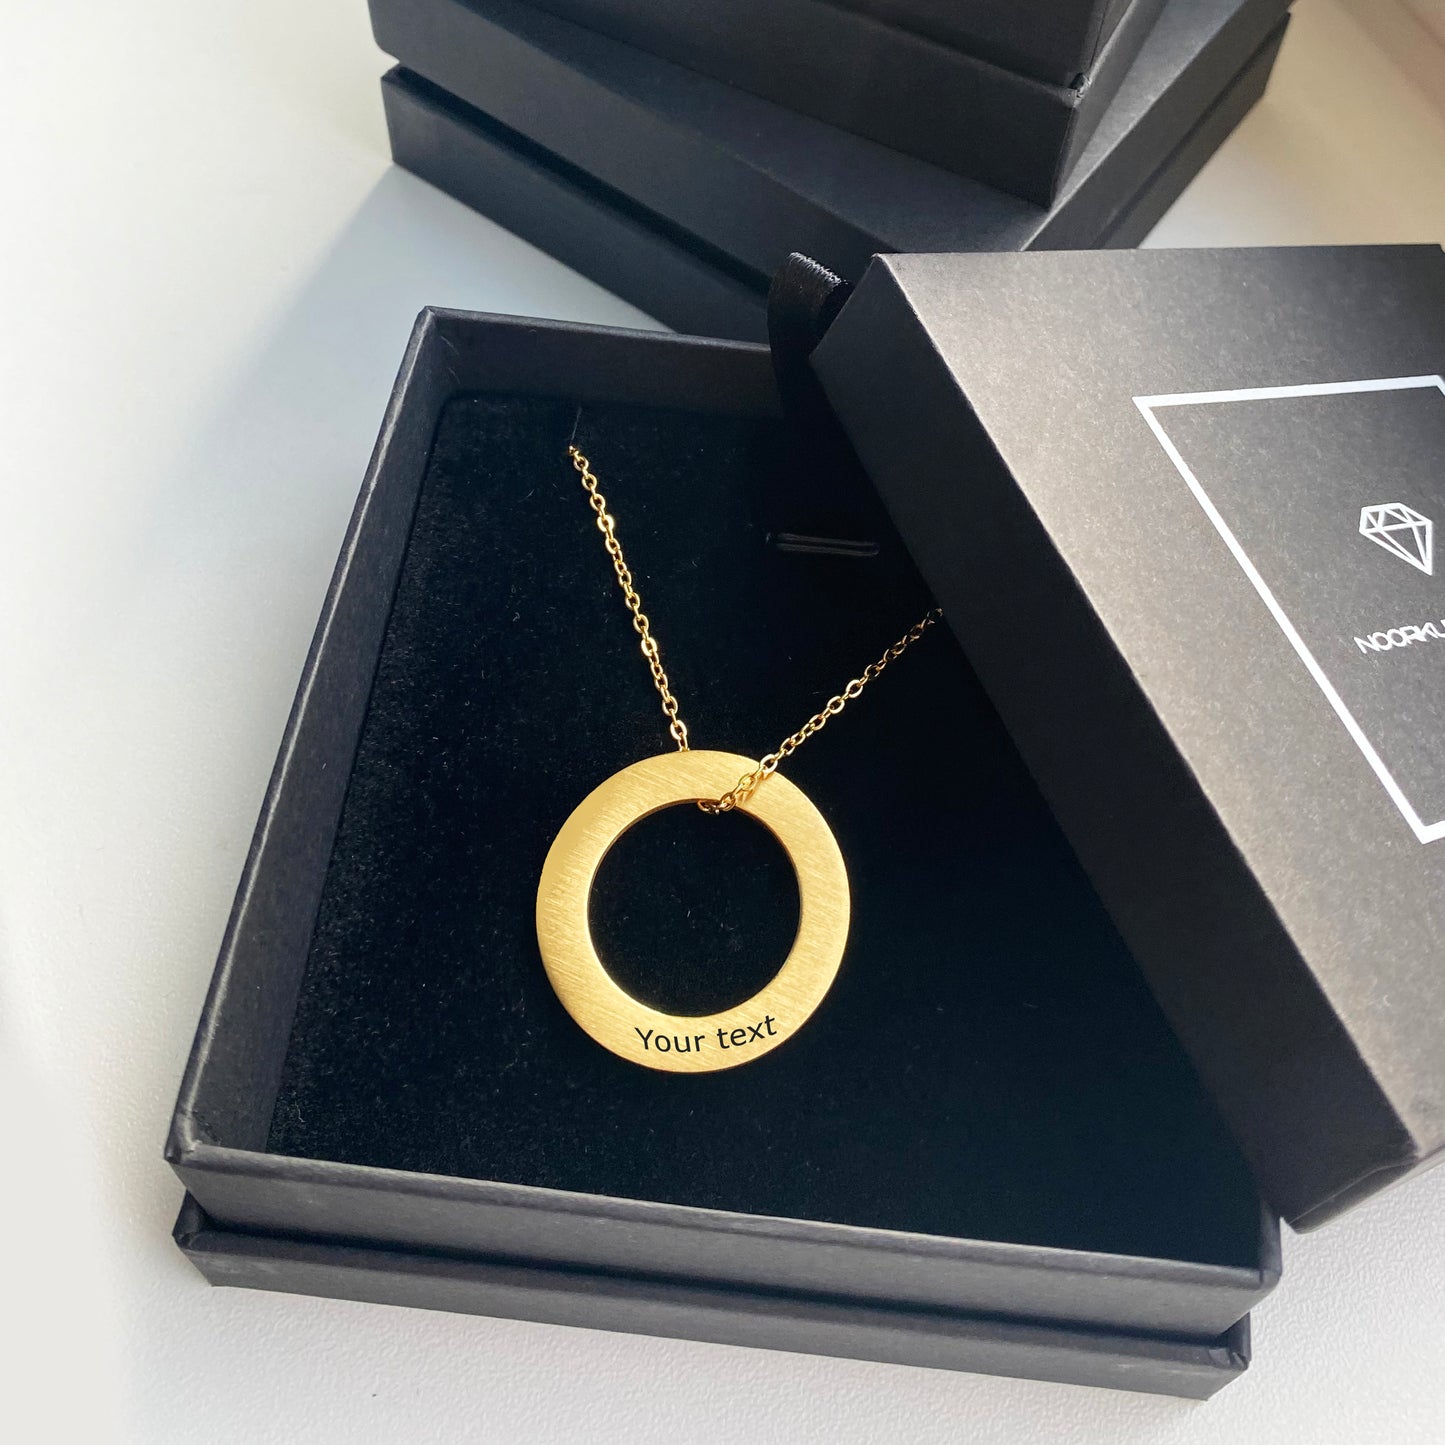 Gold plated pendant with Your engraved text 